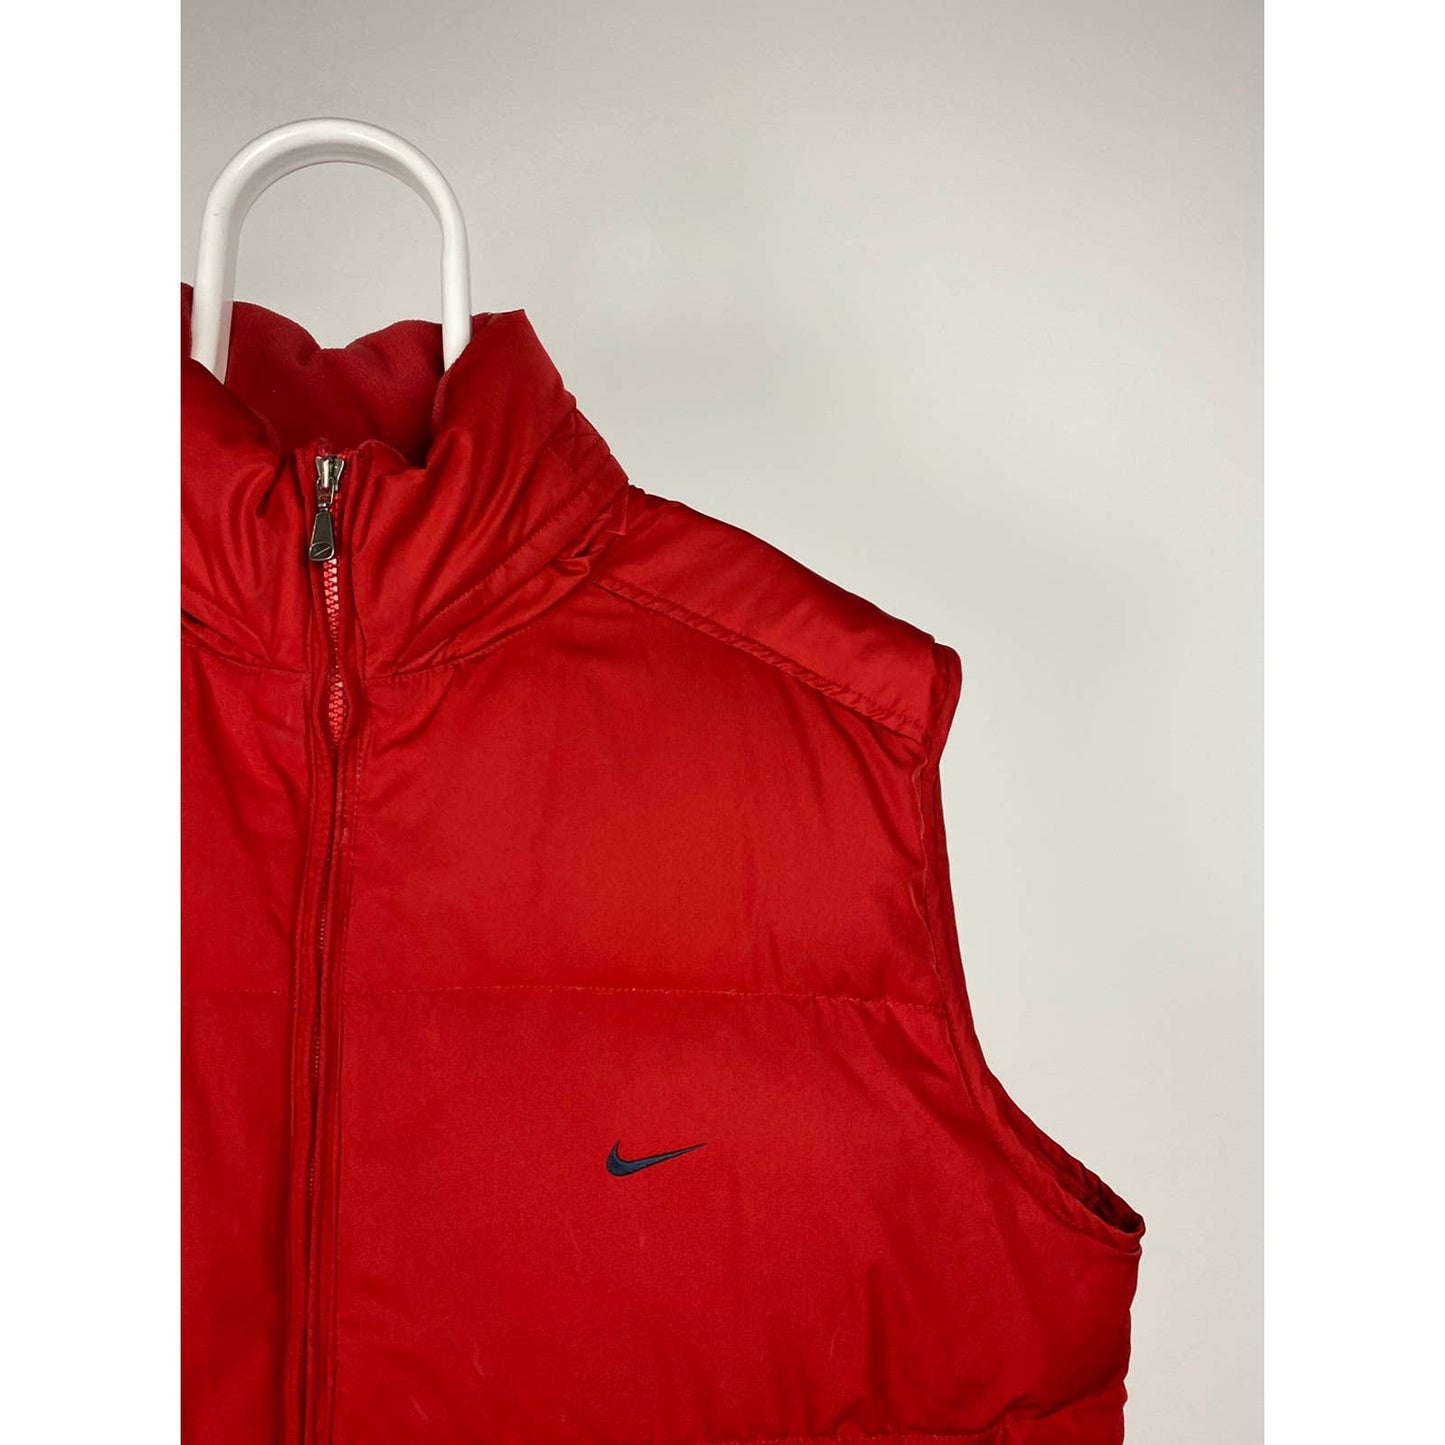 Nike vintage red puffer vest small swoosh duck down 2000s